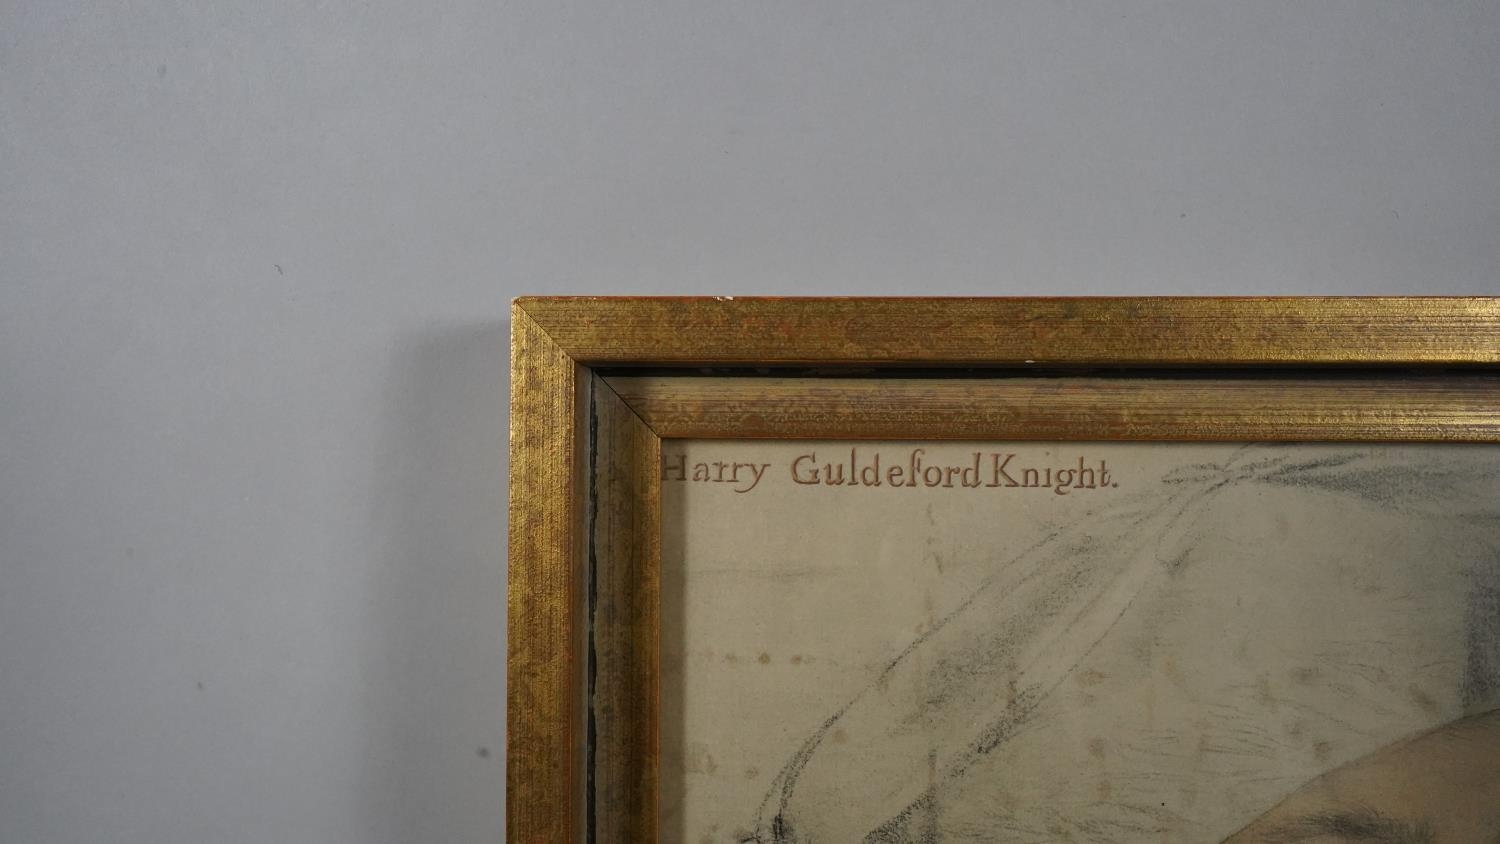 Two framed and glazed prints of drawings. One by Holbein the Younger of Henry Guildford Knight and - Image 8 of 9